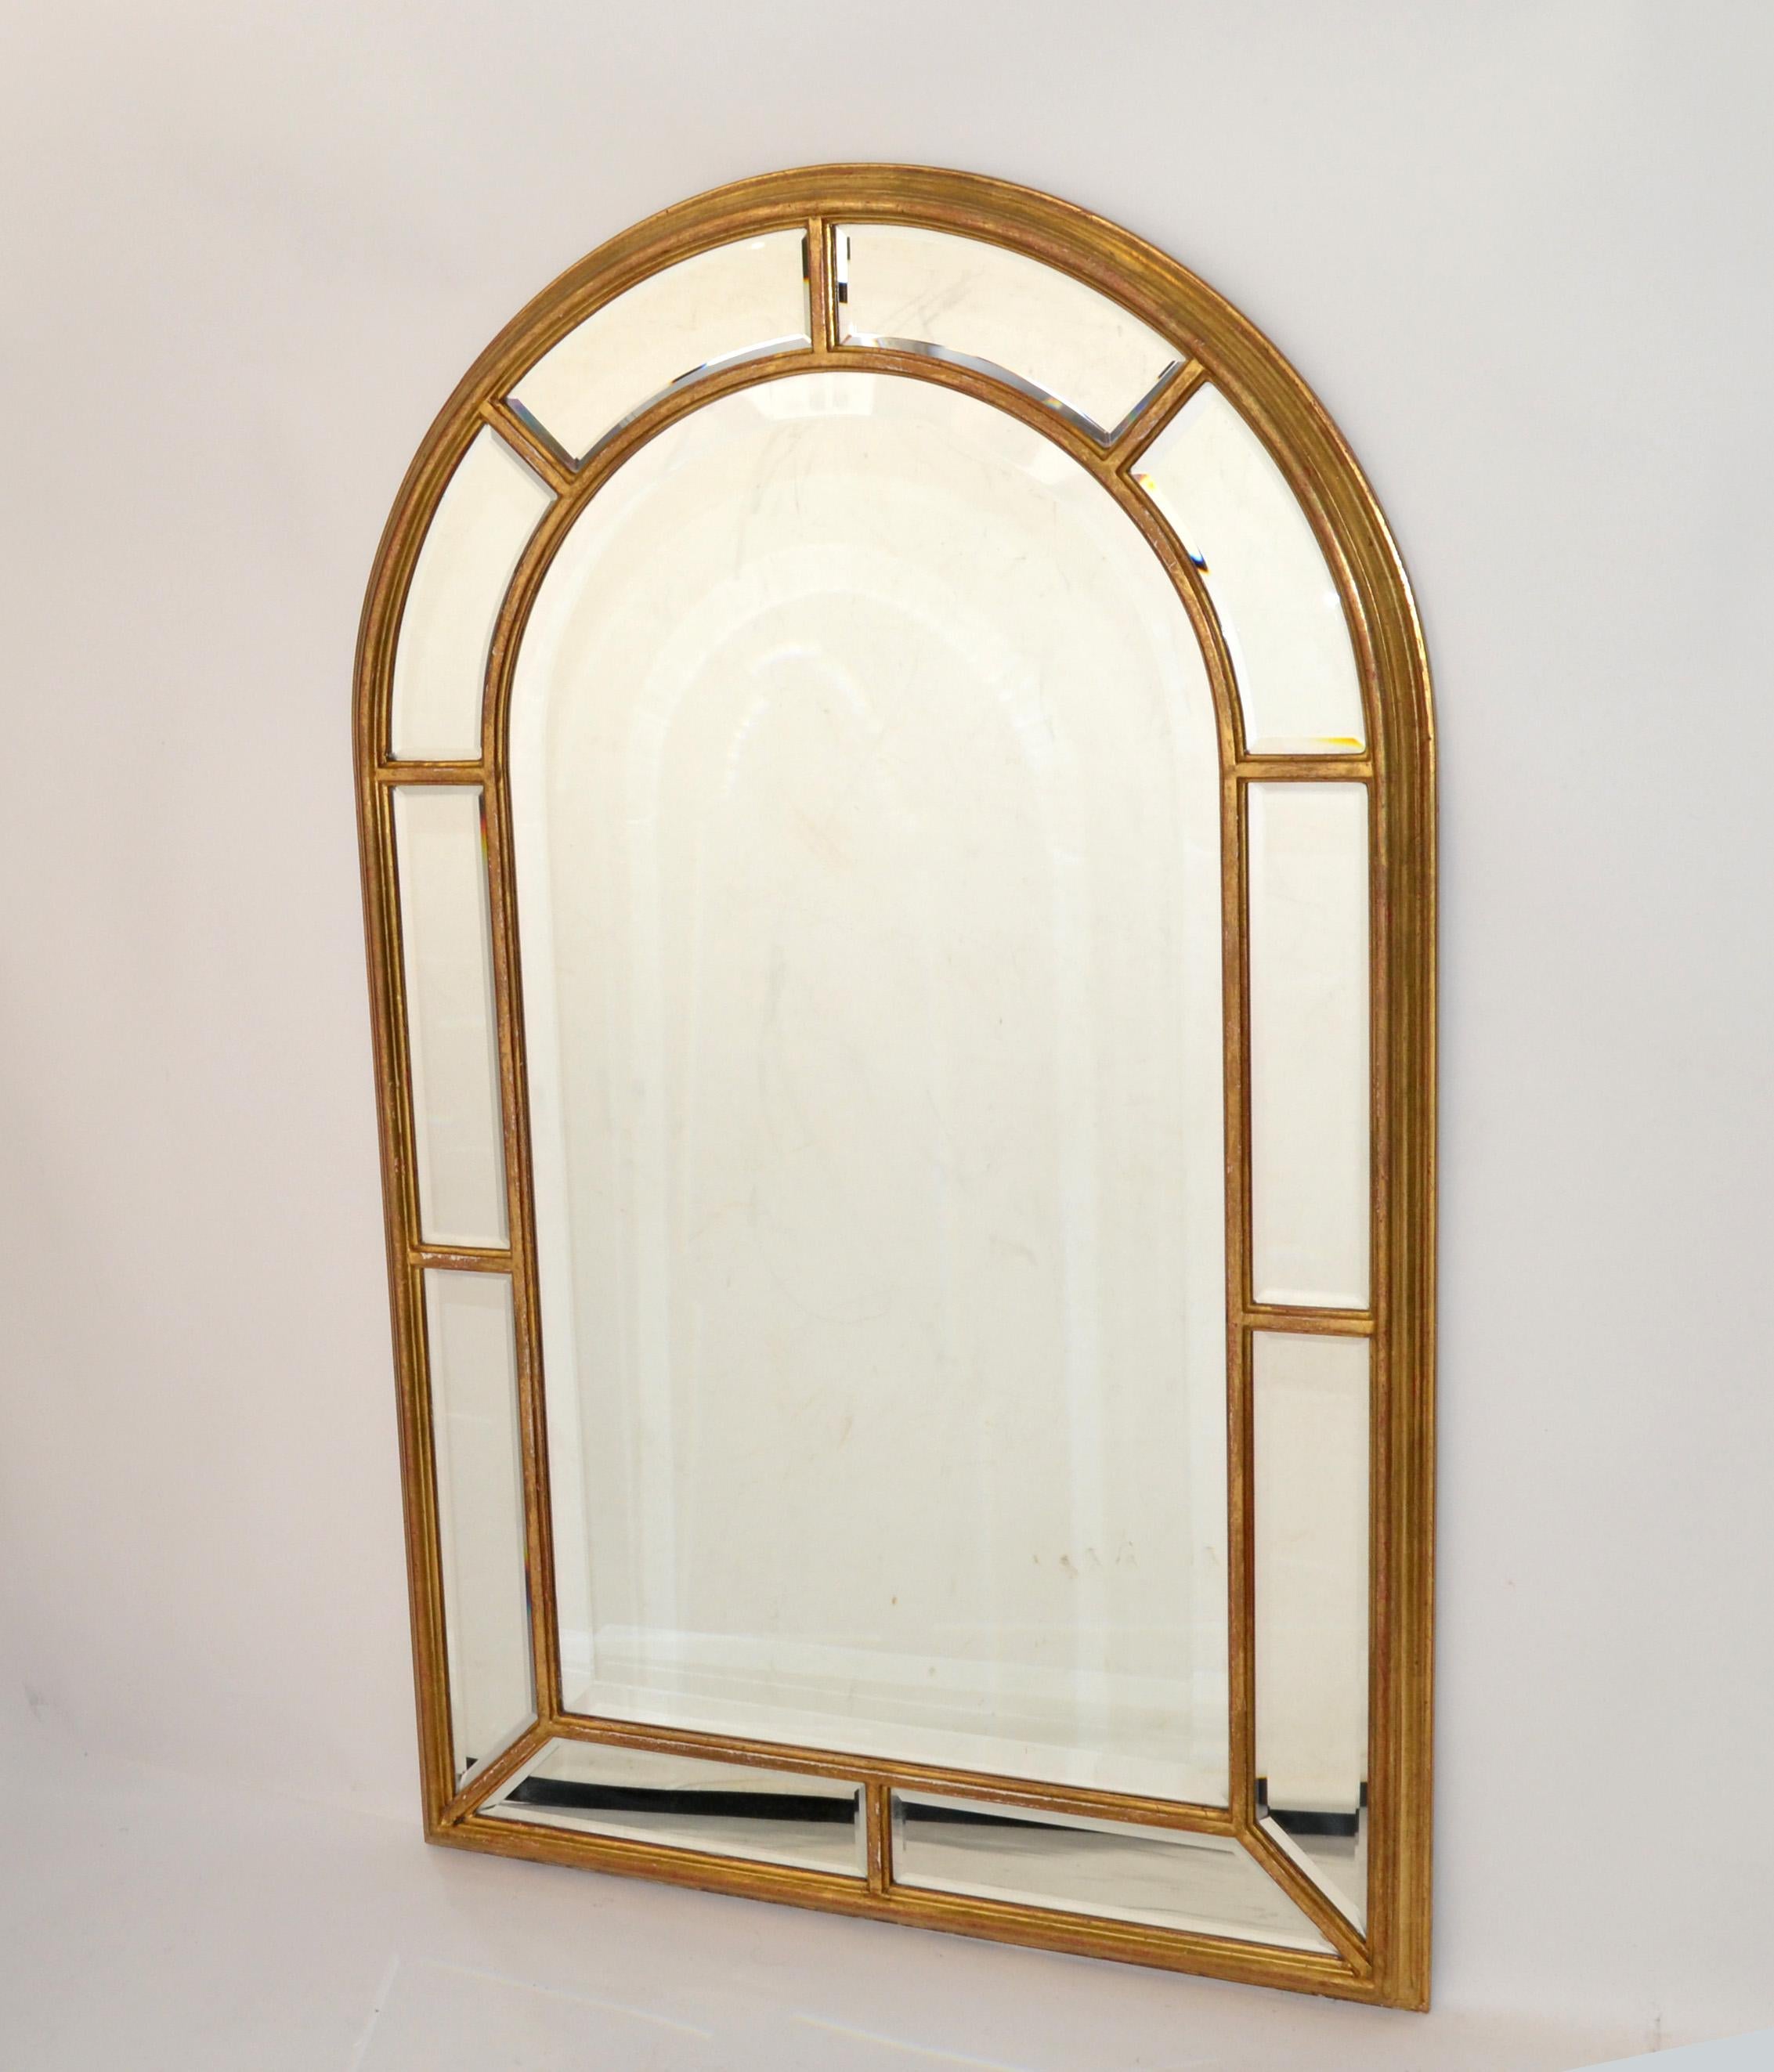 Hand-Crafted 1970s Arch Shaped Italian Firenze Beveled Glass Wall Mirror with Gilt Wood Frame For Sale